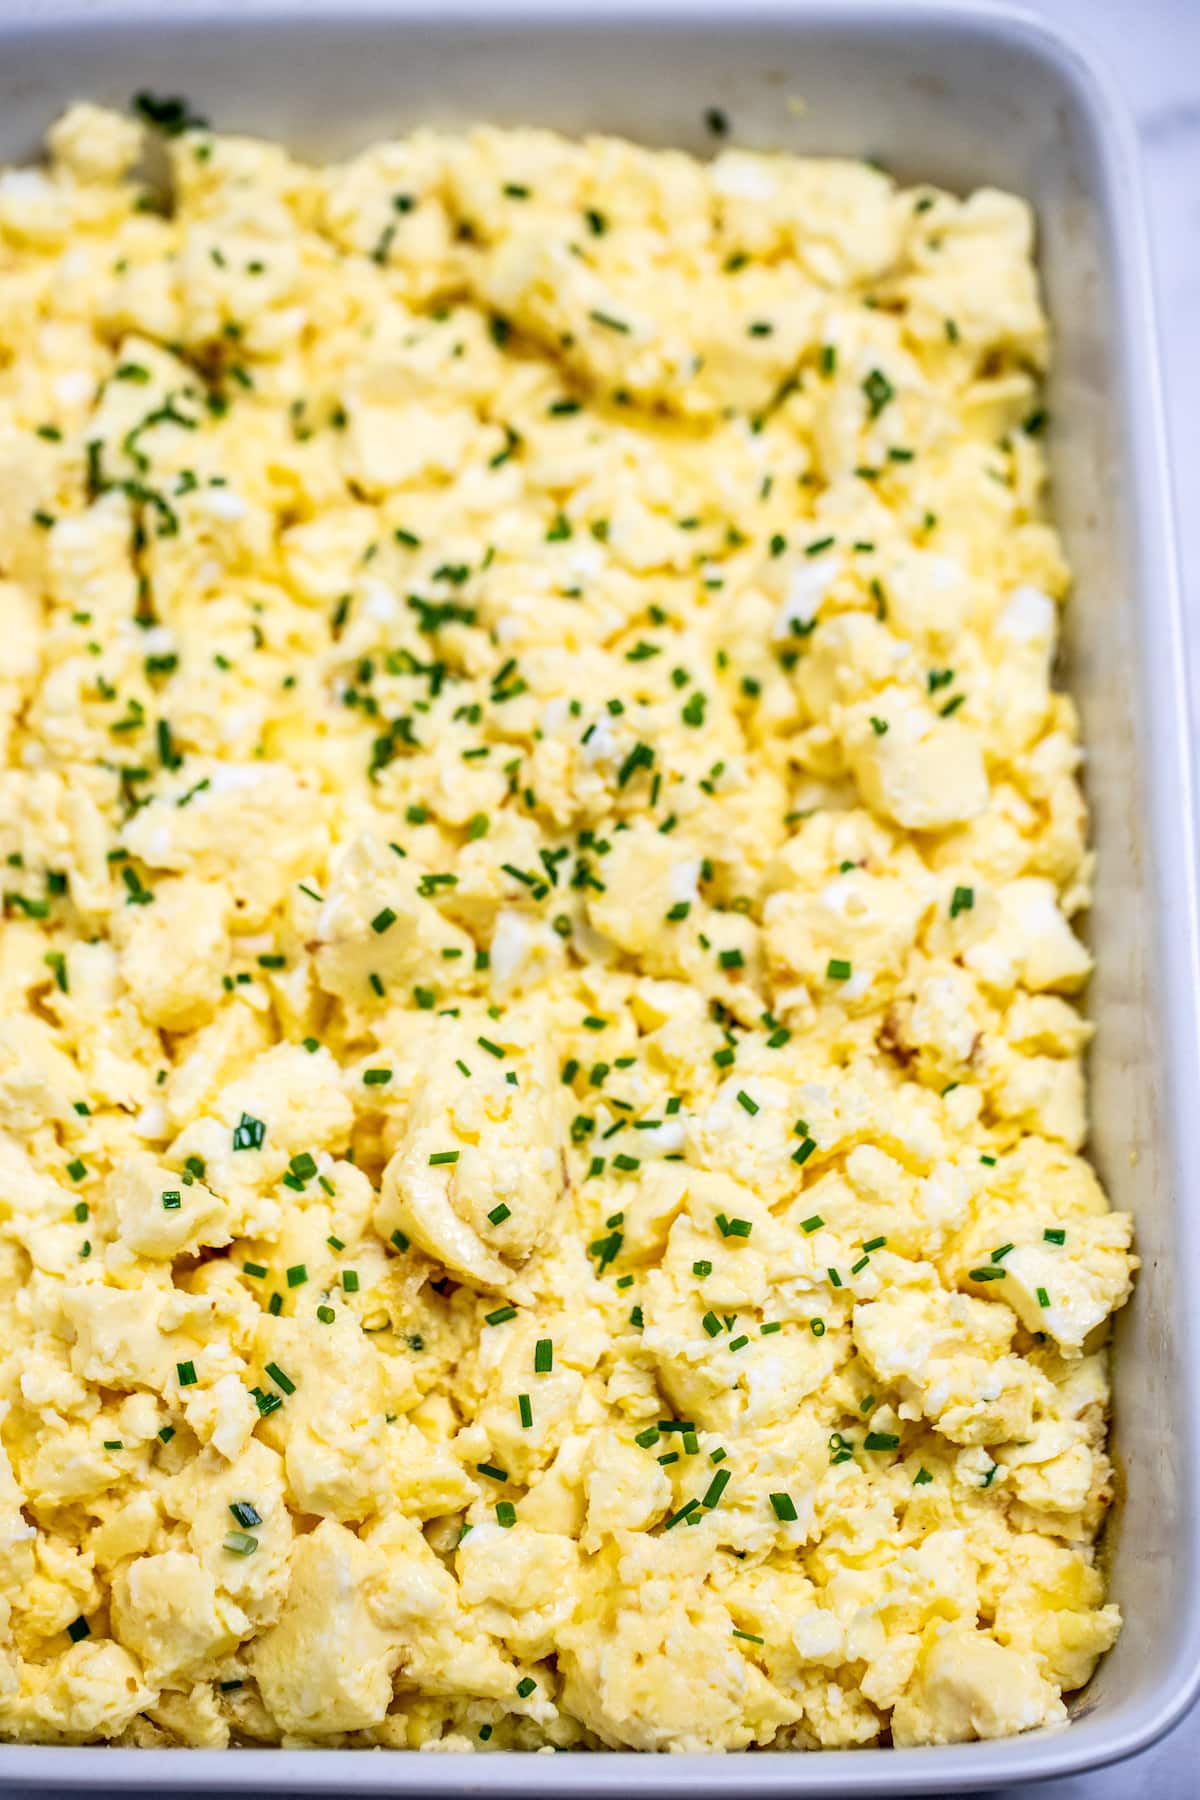 Baking dish full of scrambled eggs with chives on top.